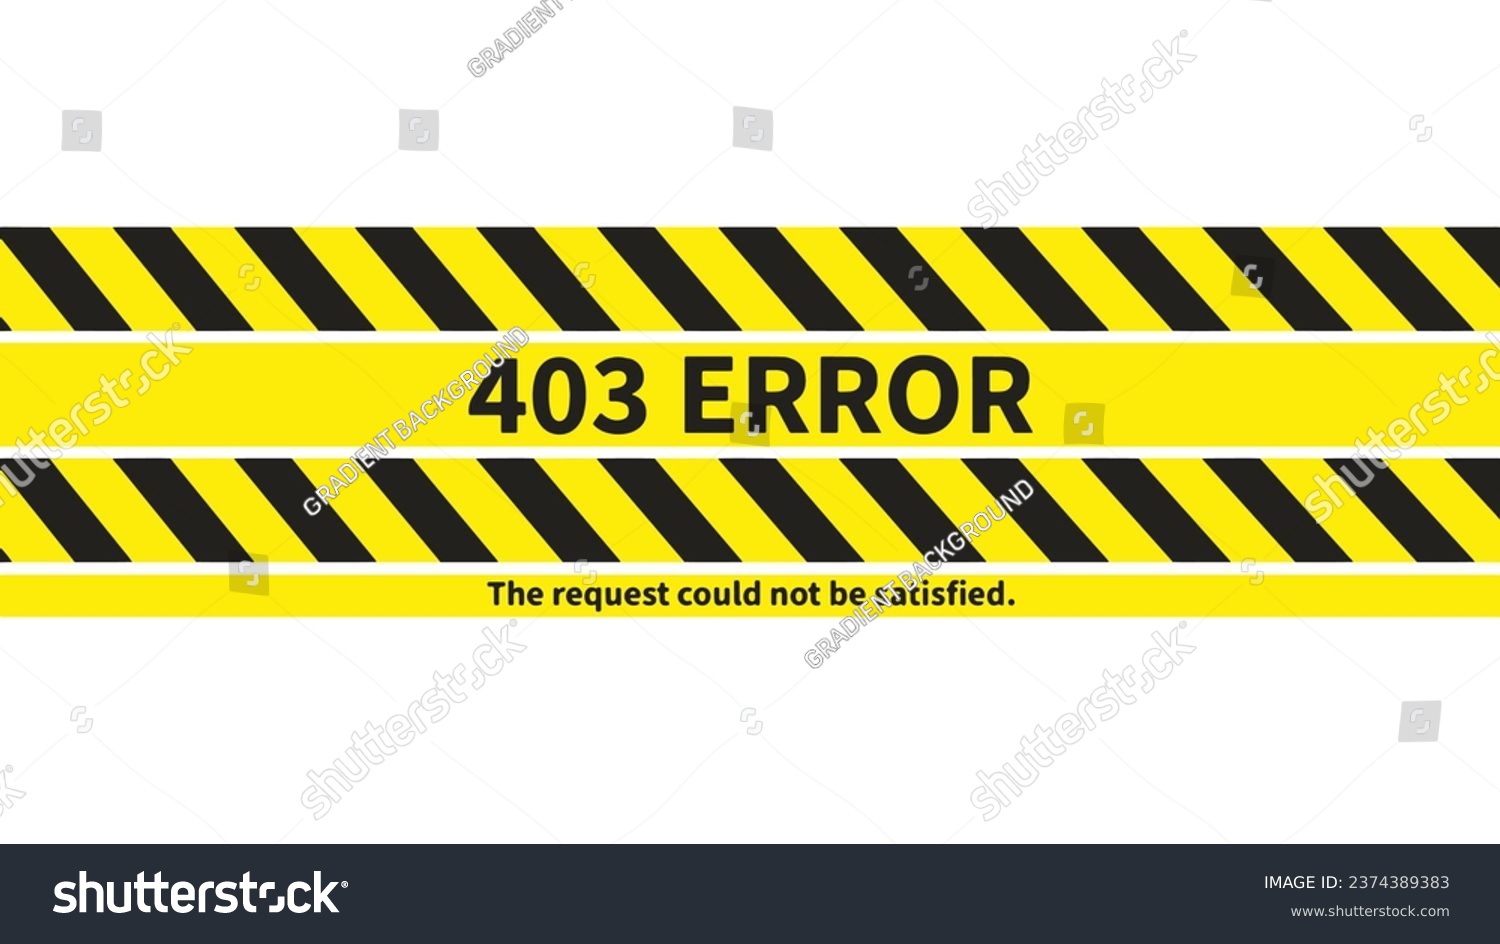 SVG of 403 error - the request could not be satisfied. Two signal tapes, with black and yellow stripes, prominently displaying the phrase 403 error. svg